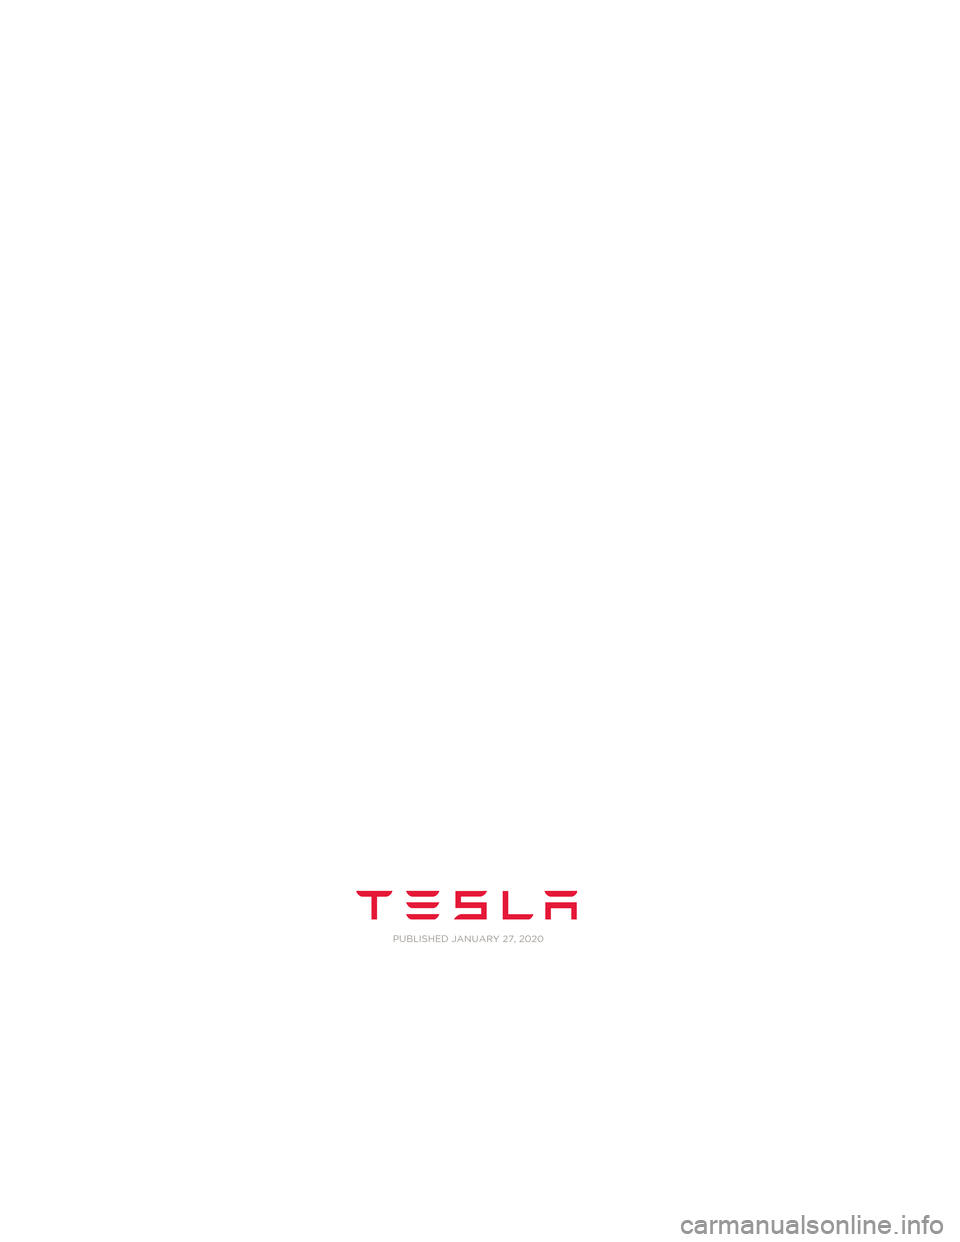 TESLA MODEL 3 2020  Owners Manuals Model S Quick Guide - NA Rev C.book  Page 2  Wednesday, December 18, 2013  12:40 PM P
UBLISHED JANUARY 27, 2020 